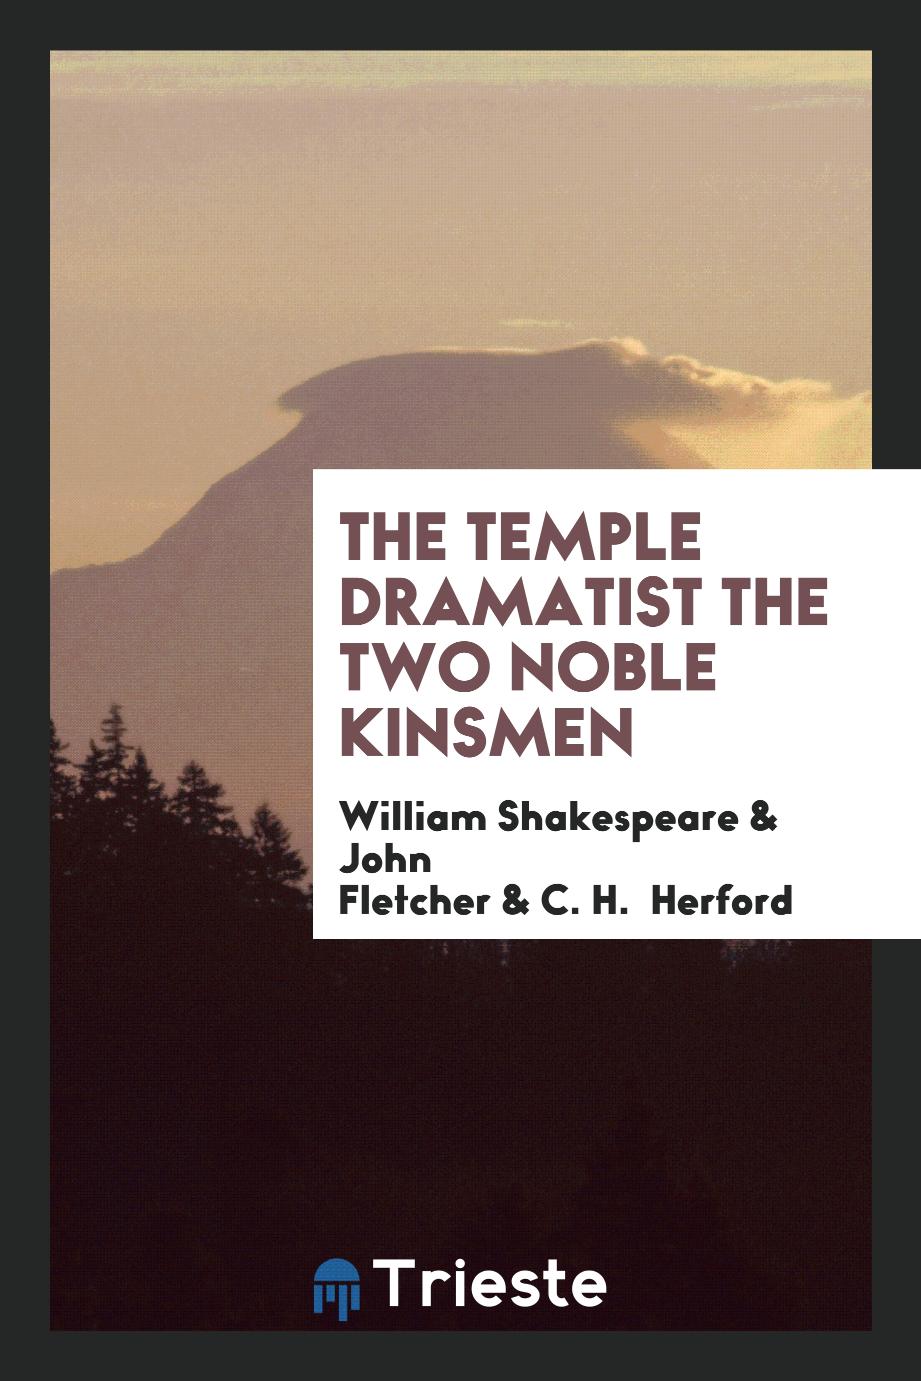 The Temple Dramatist the Two Noble Kinsmen